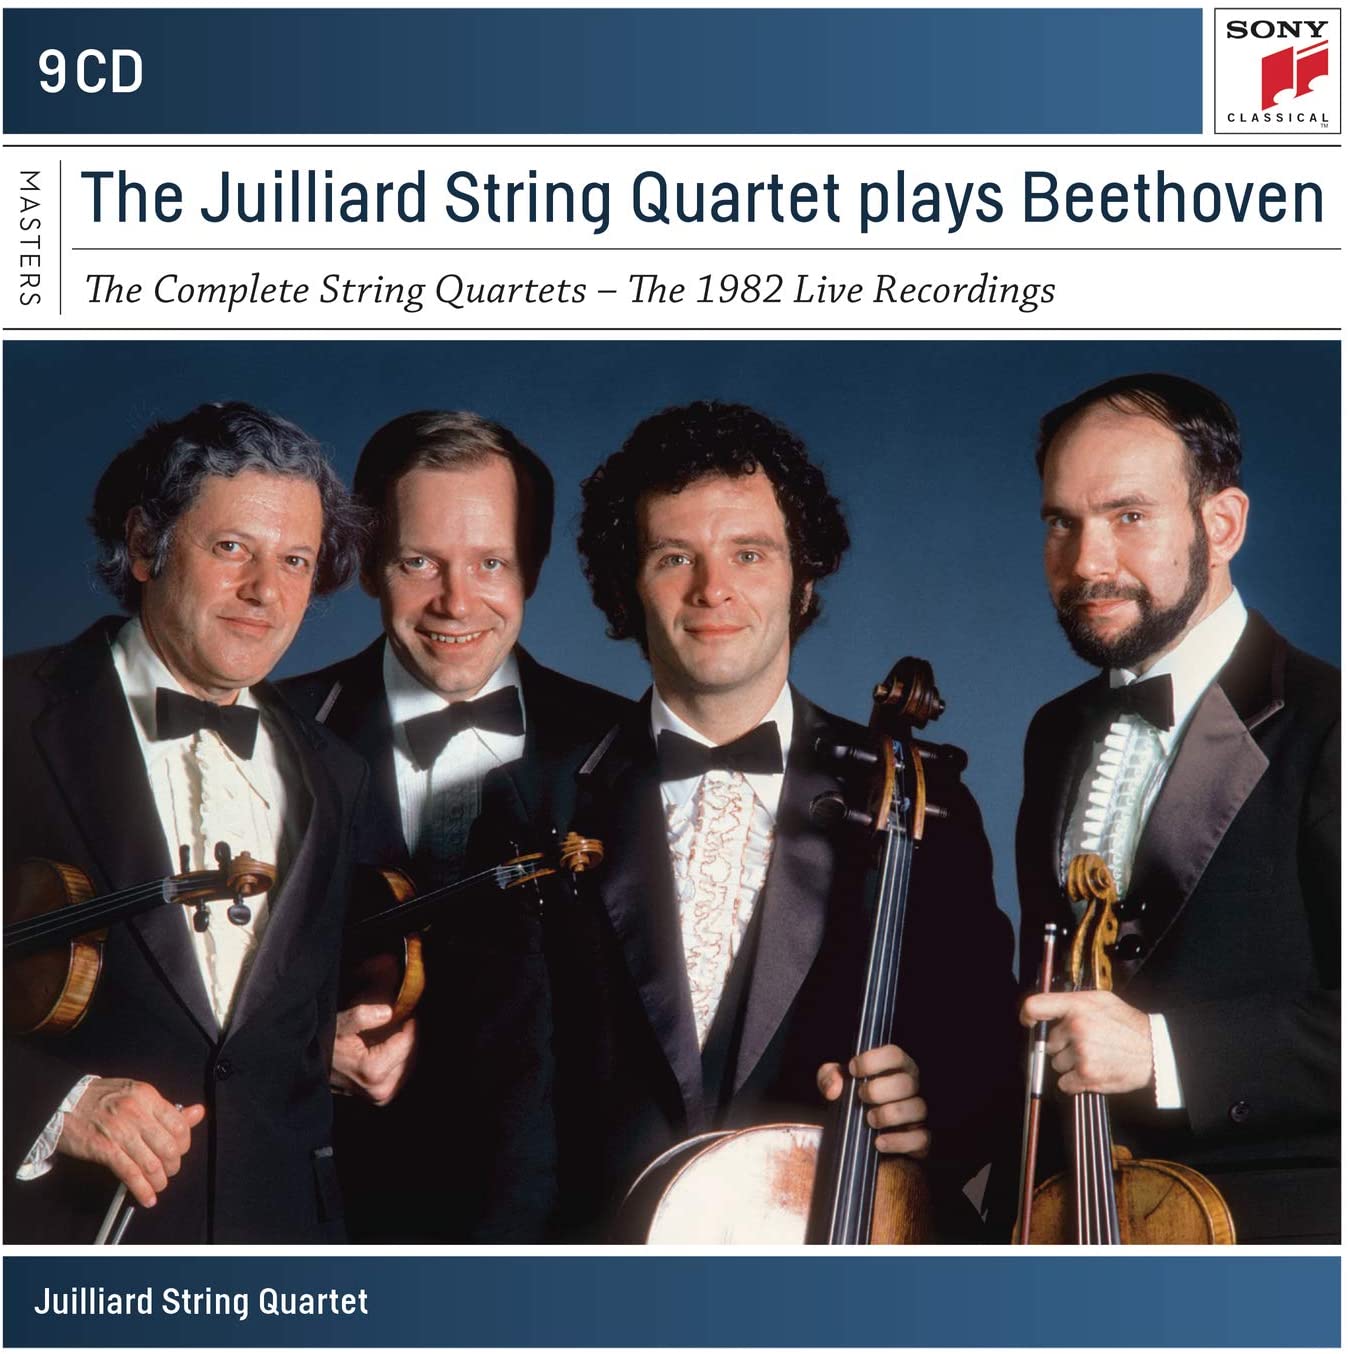 Beethoven: The Complete String Quartets - The 1982 Live Recordings